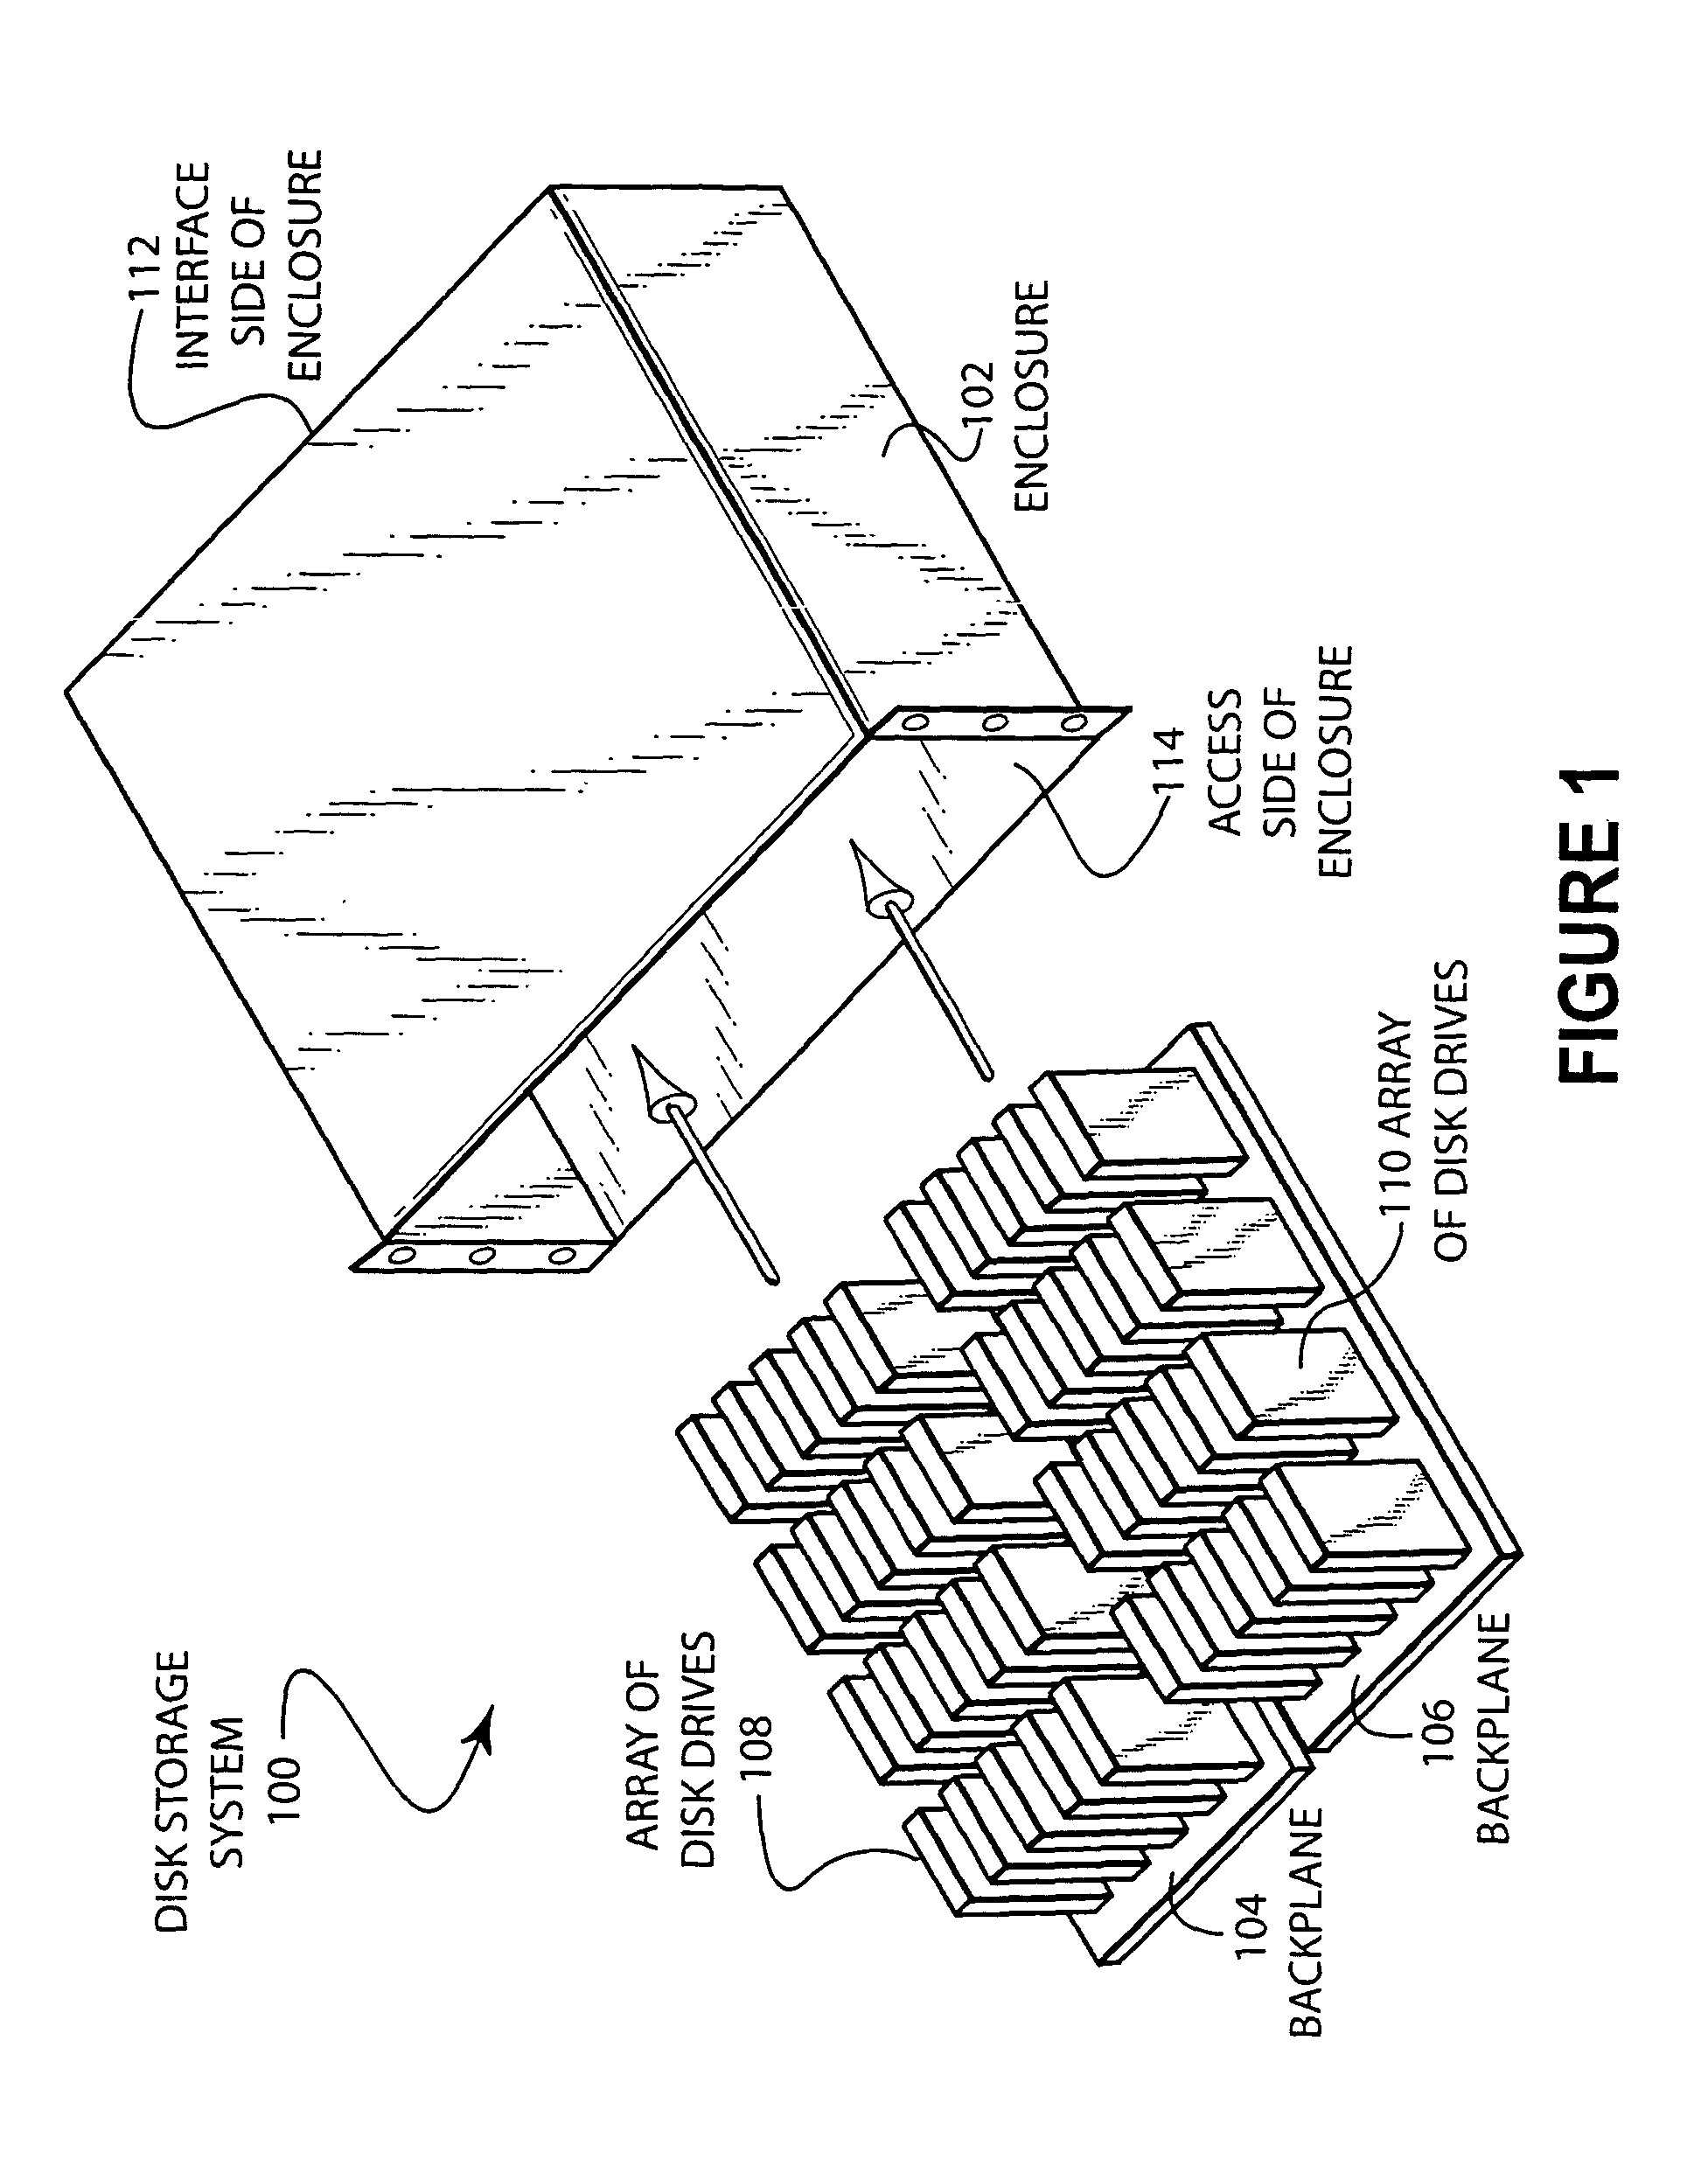 Disk storage system with removable arrays of disk drives